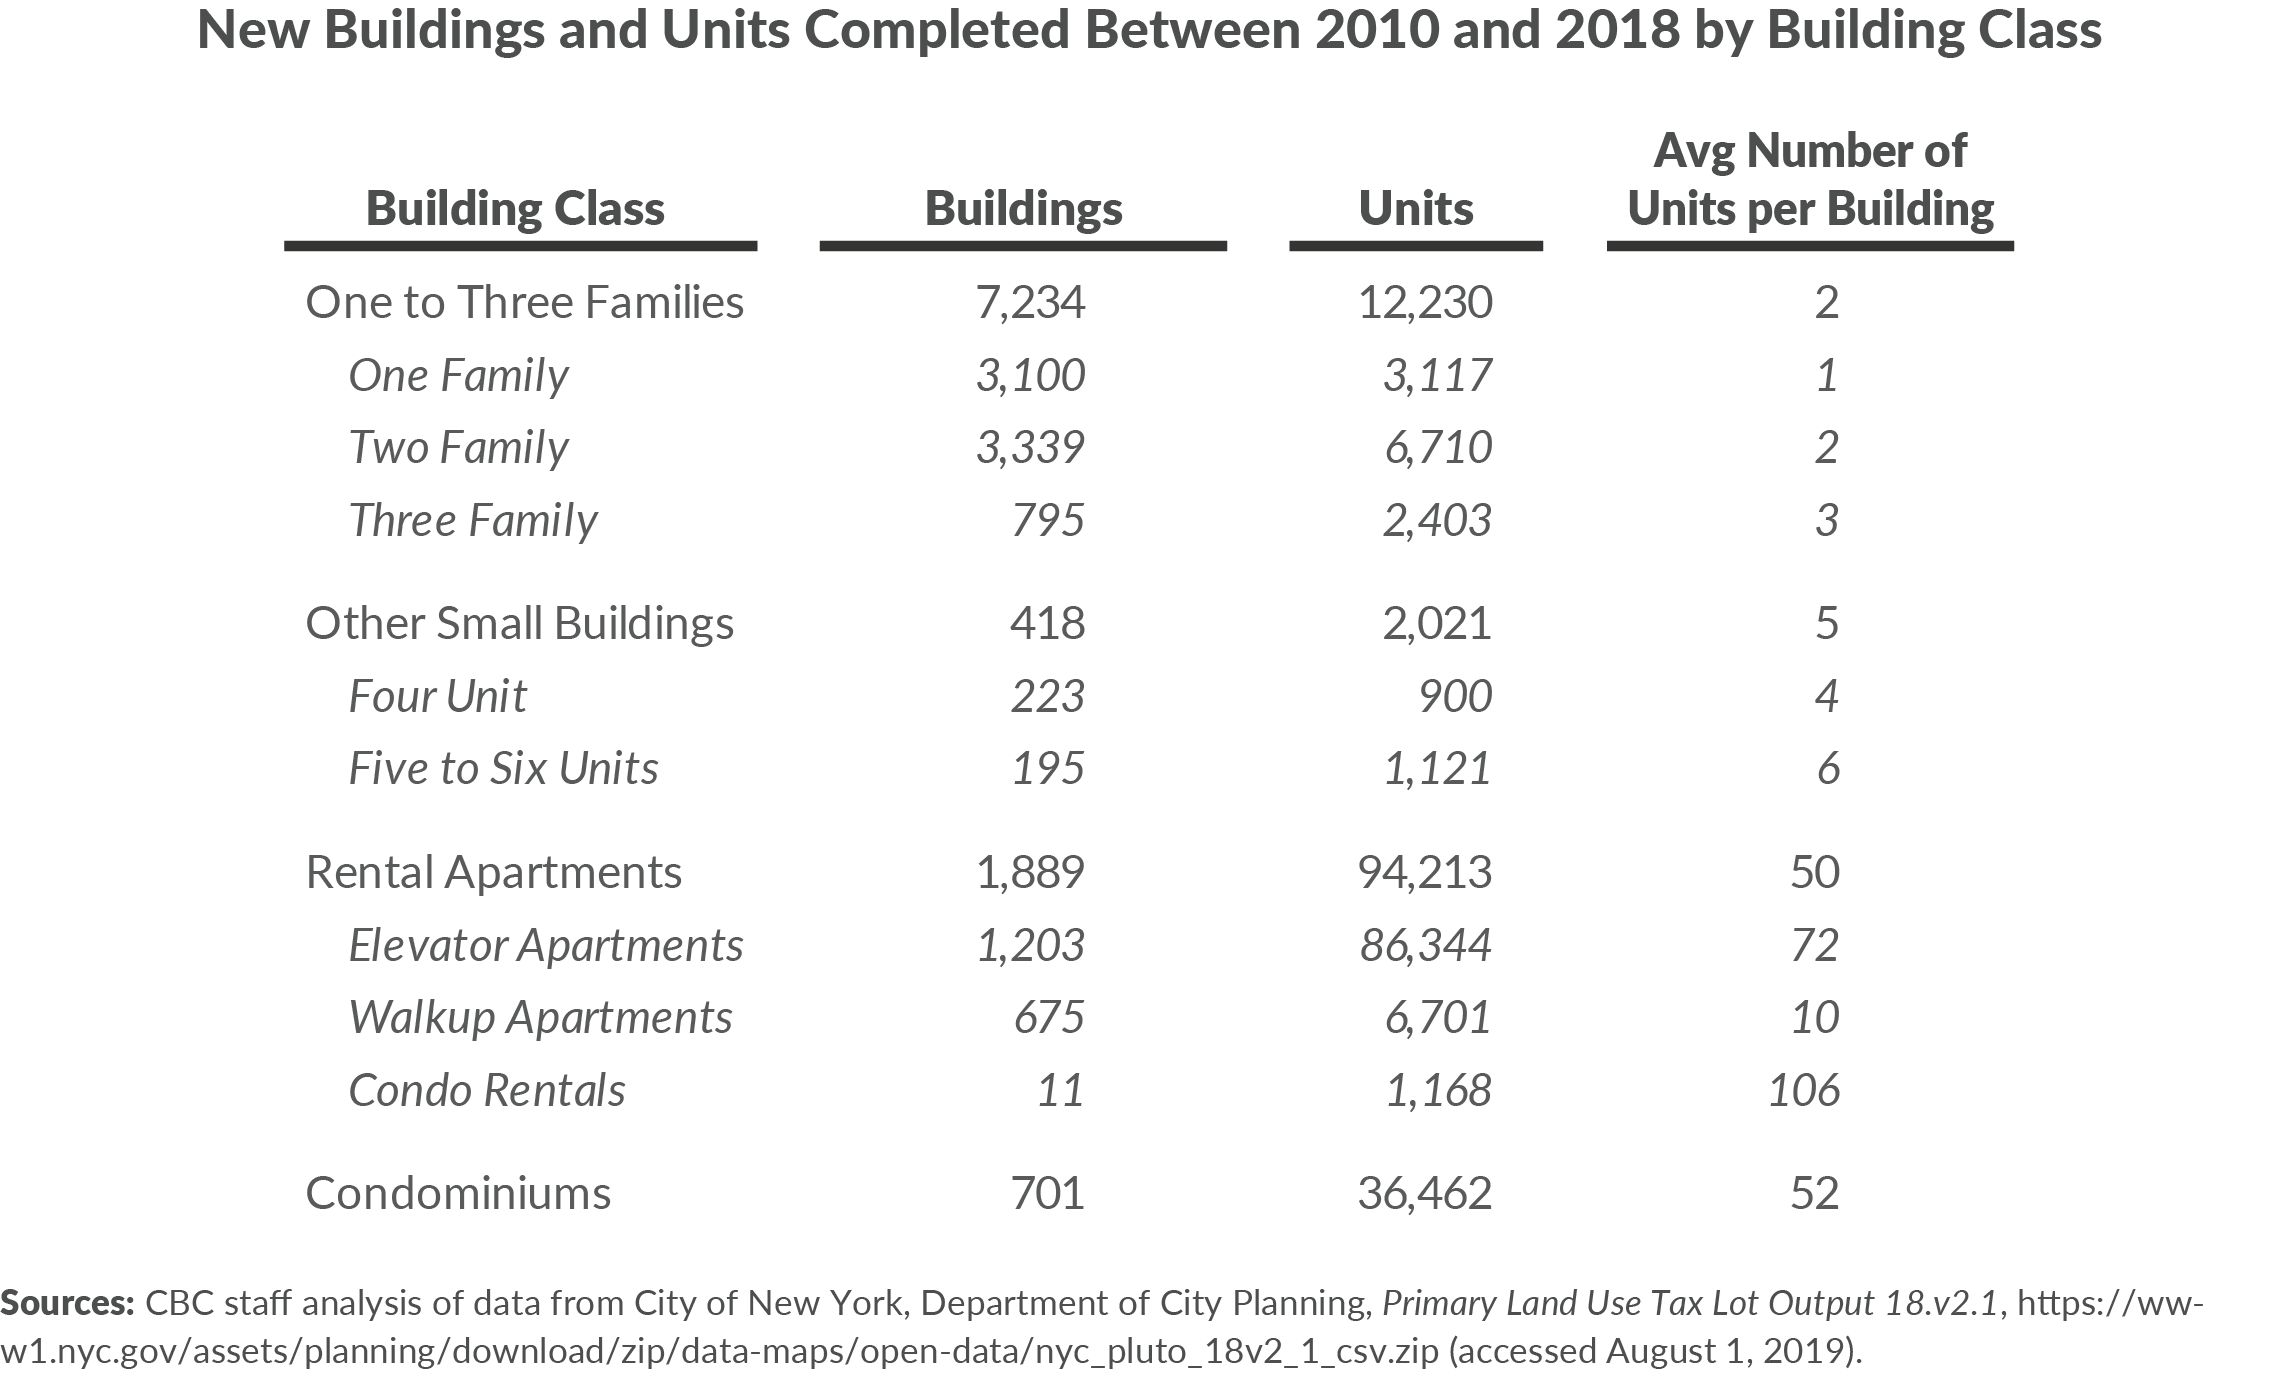 New Buildings and Units Completed Between 2010 and 2018 by Building Class